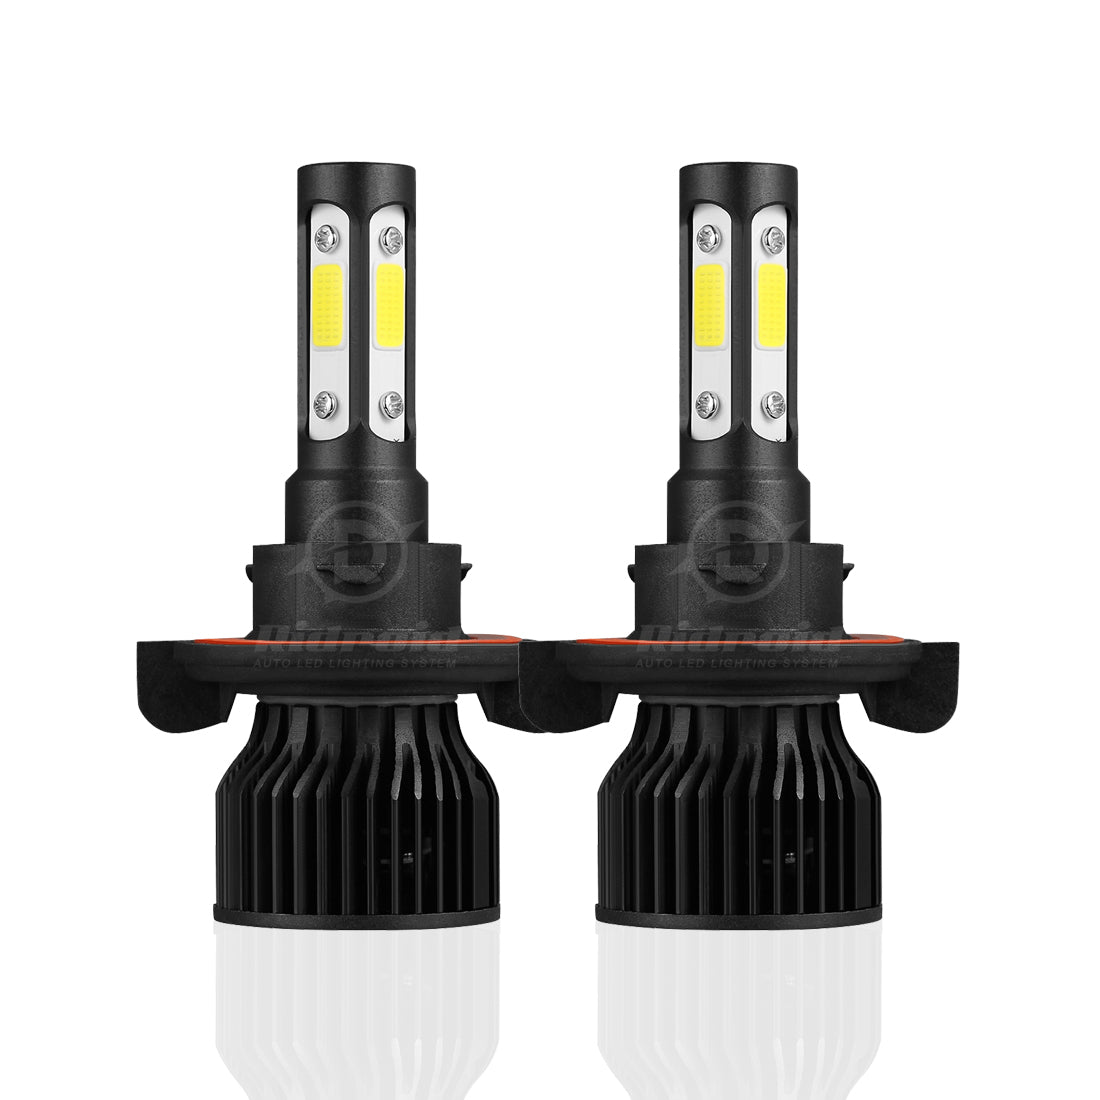 Why Should You Purchase H13/9008 LED Headlight Bulbs?